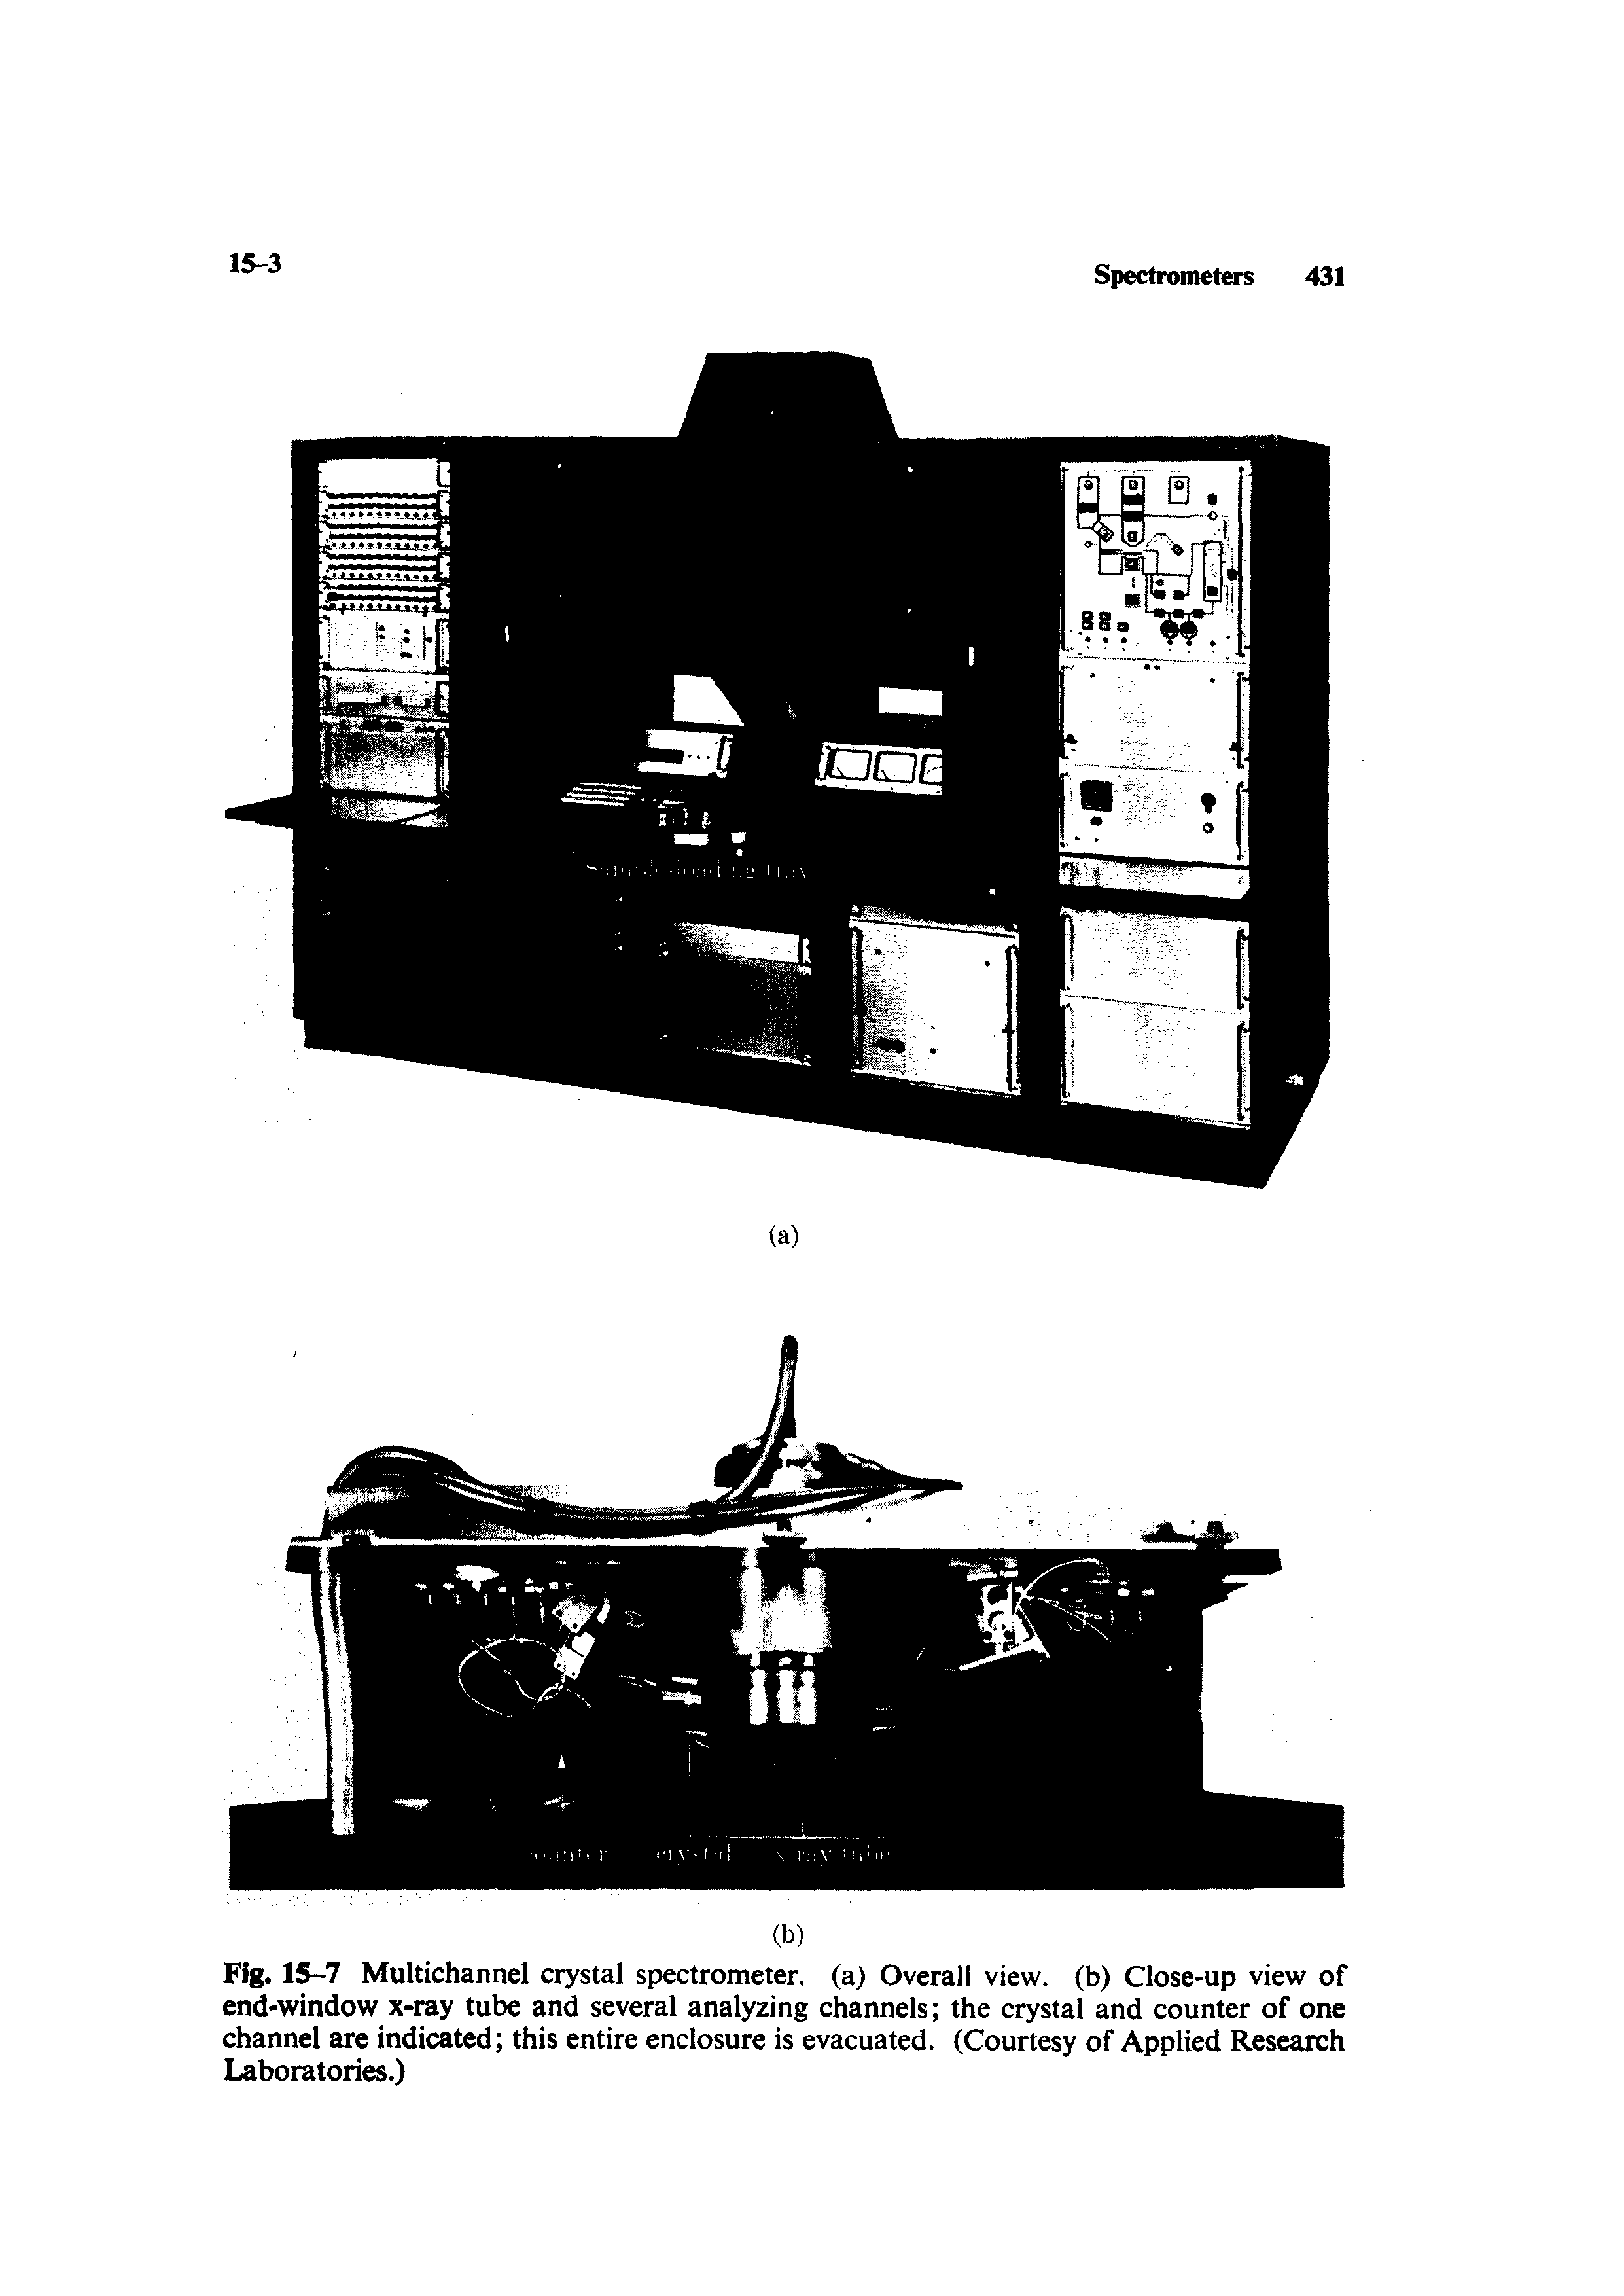 Fig. 15-7 Multichannel crystal spectrometer, (a) Overall view, (b) Close-up view of end-window x-ray tube and several analyzing channels the crystal and counter of one channel are indicated this entire enclosure is evacuated. (Courtesy of Applied Research Laboratories.)...